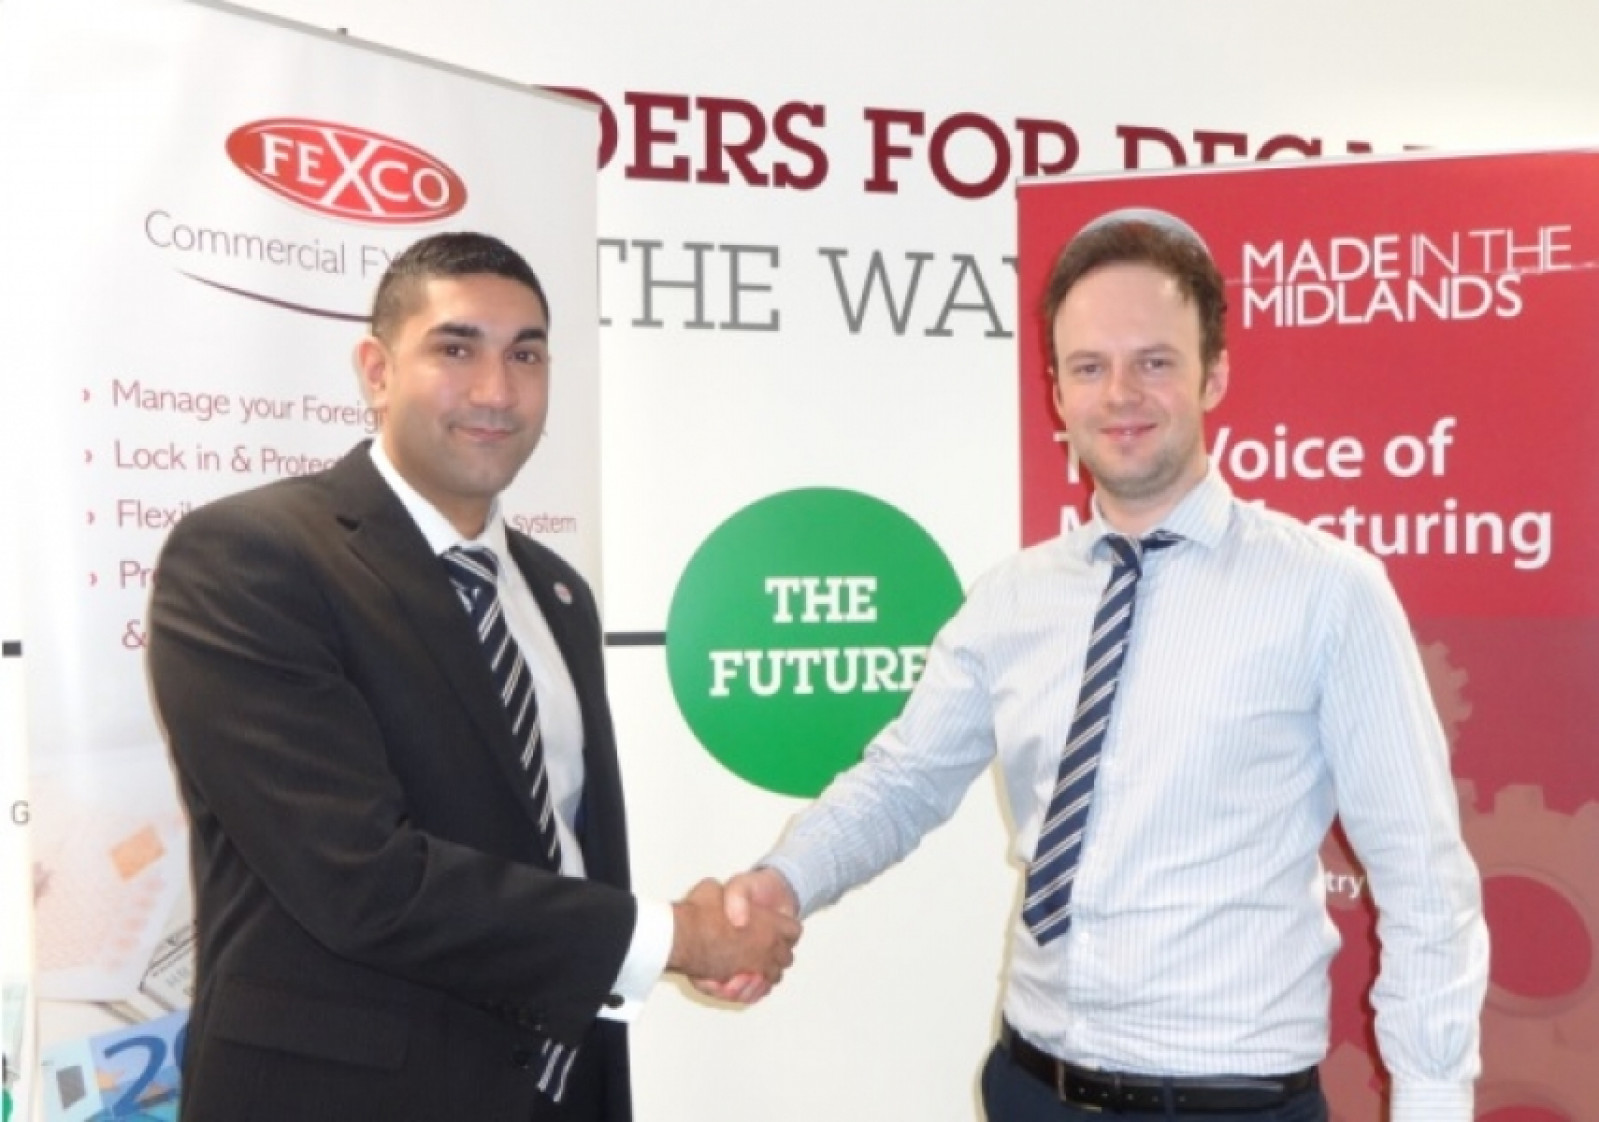 Made in the Midlands partners with FEXCO to offer expert advice for manufacturers expanding abroad